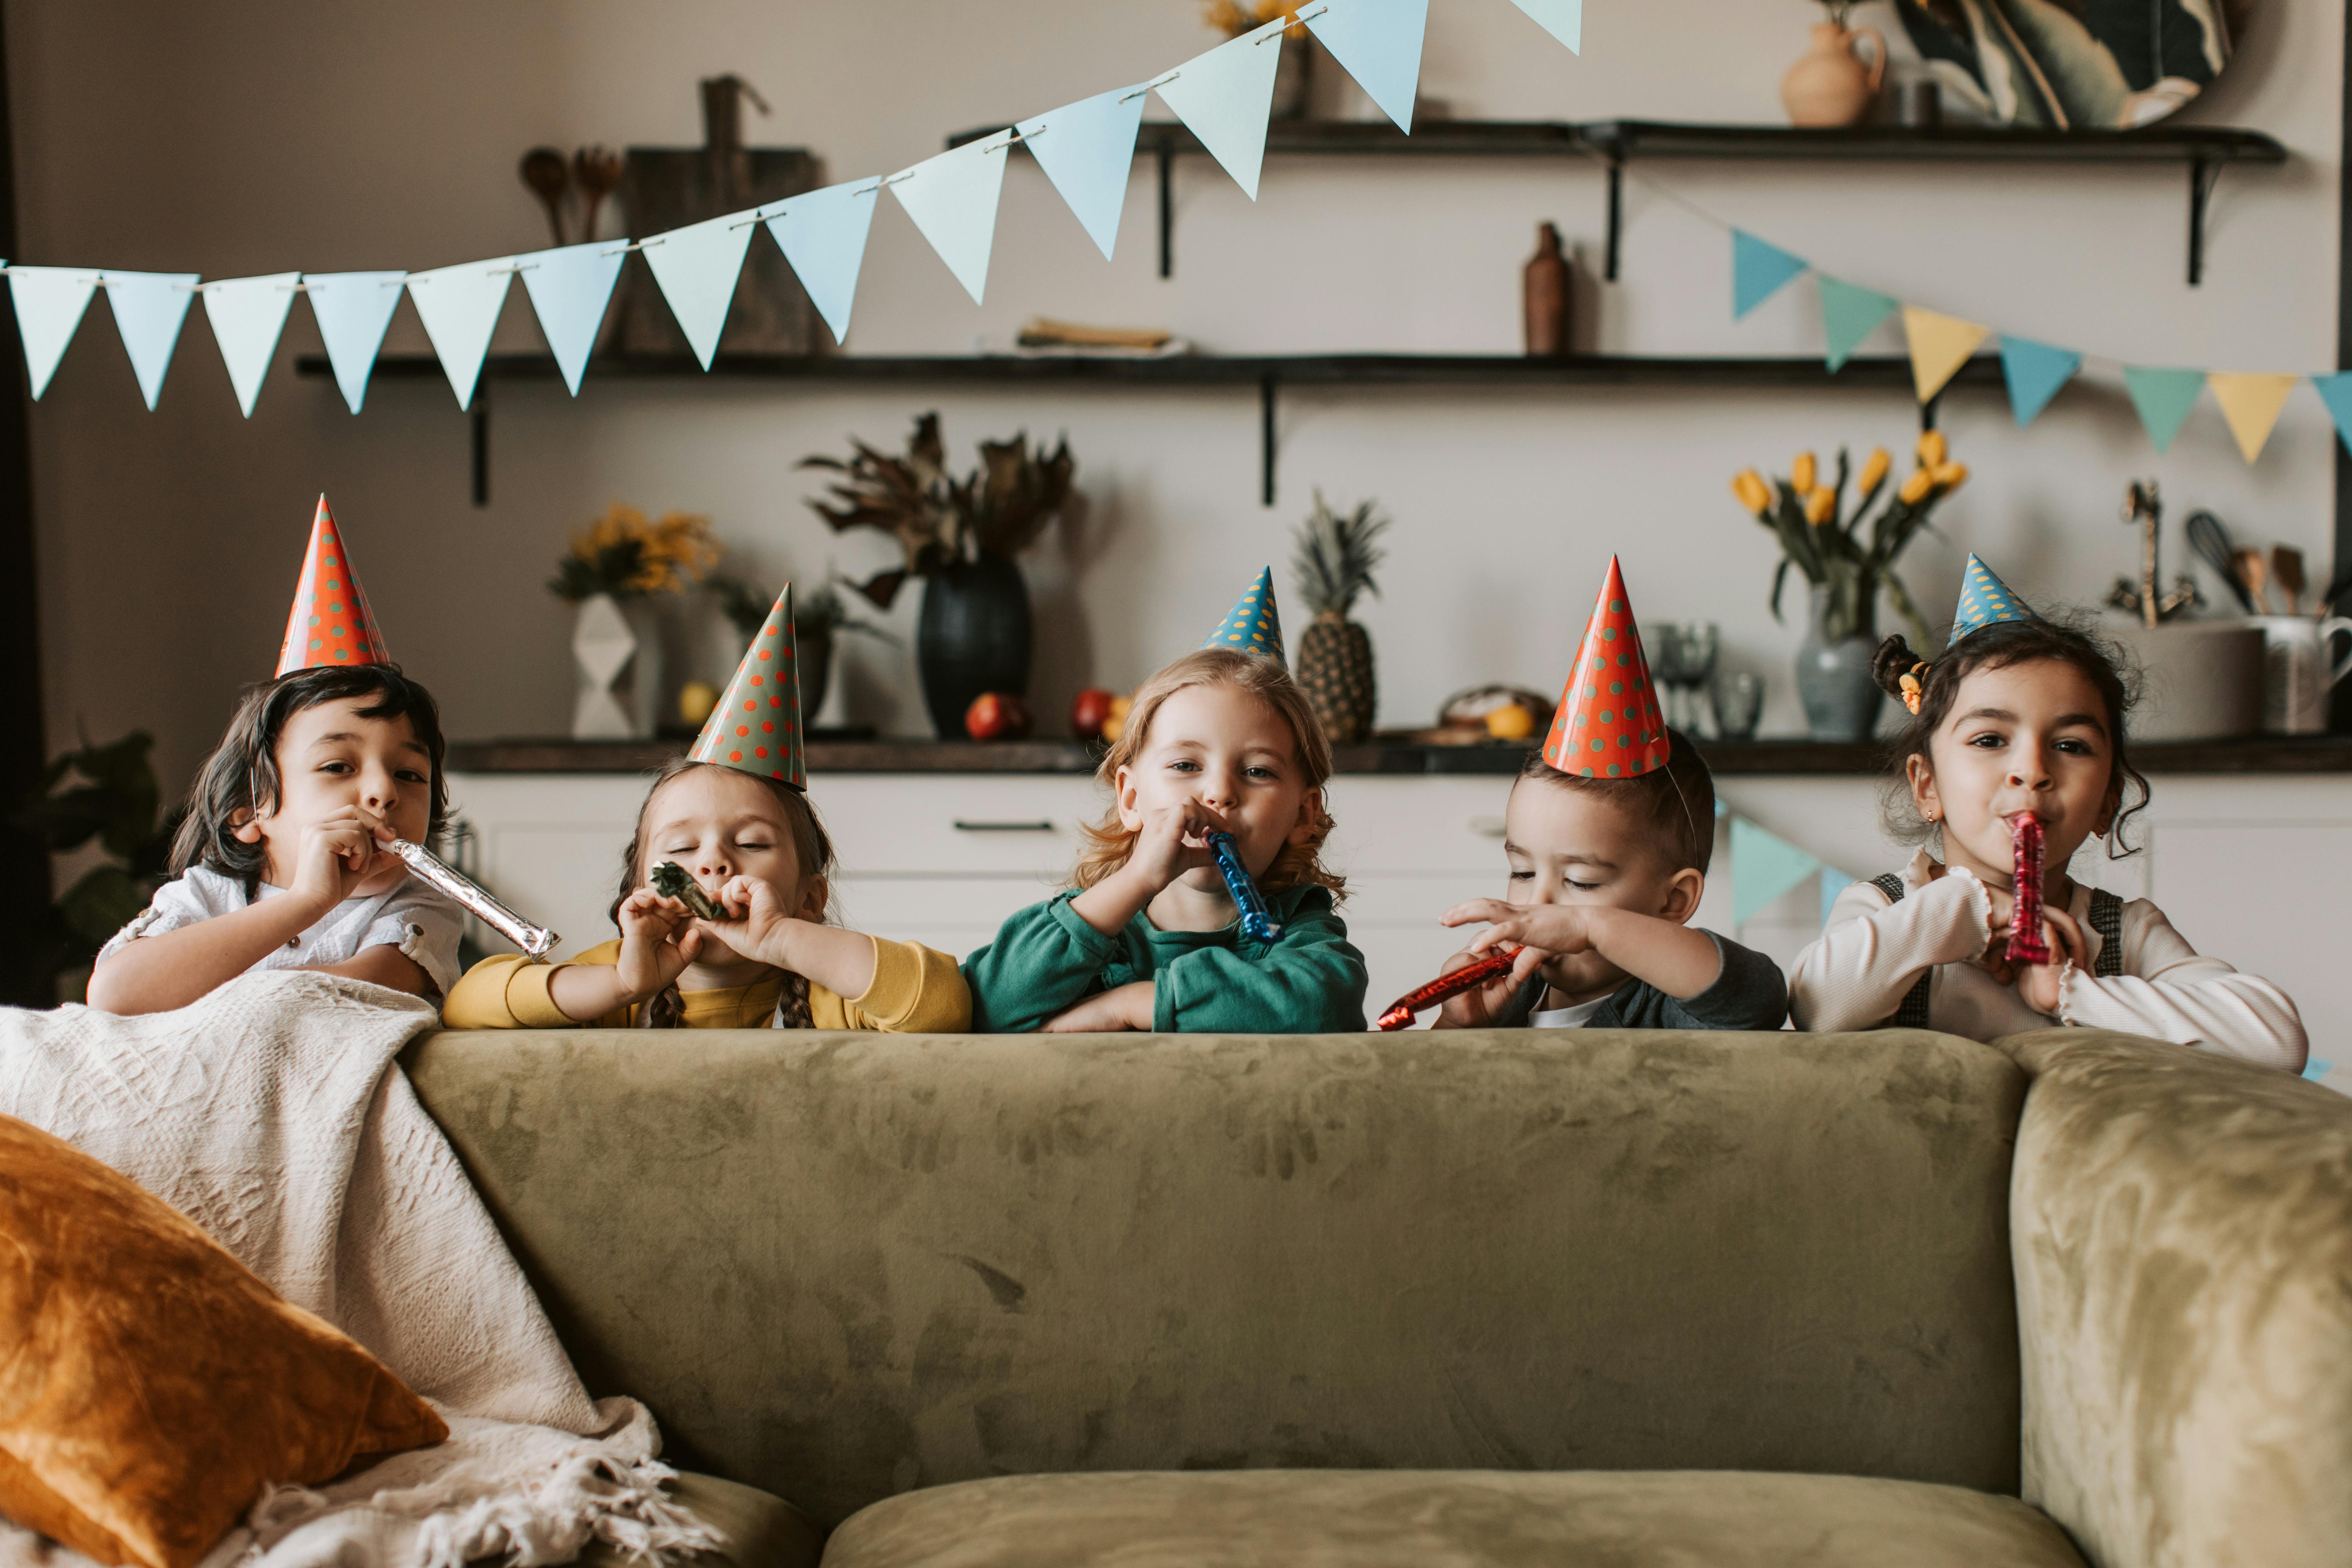 Free Kids at a Birthday Party  Stock Photo